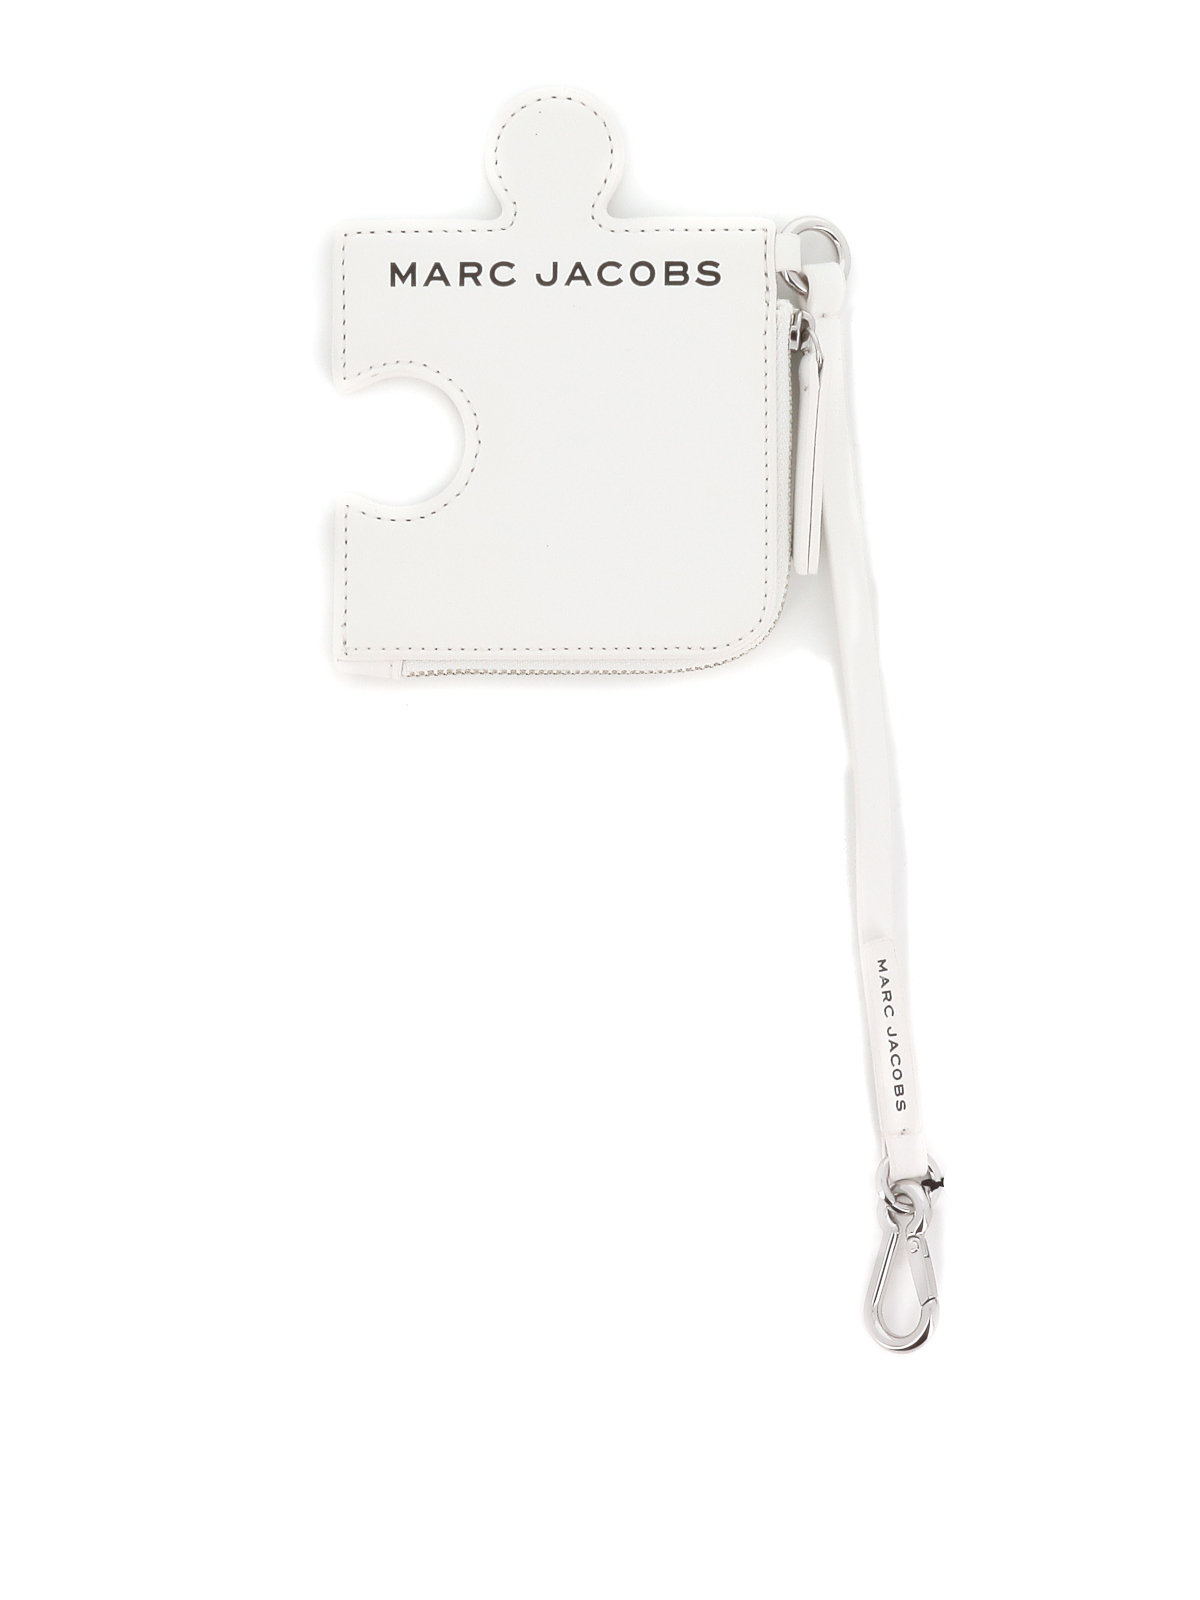 Marc Jacobs The Jigsaw Puzzle Purse In White